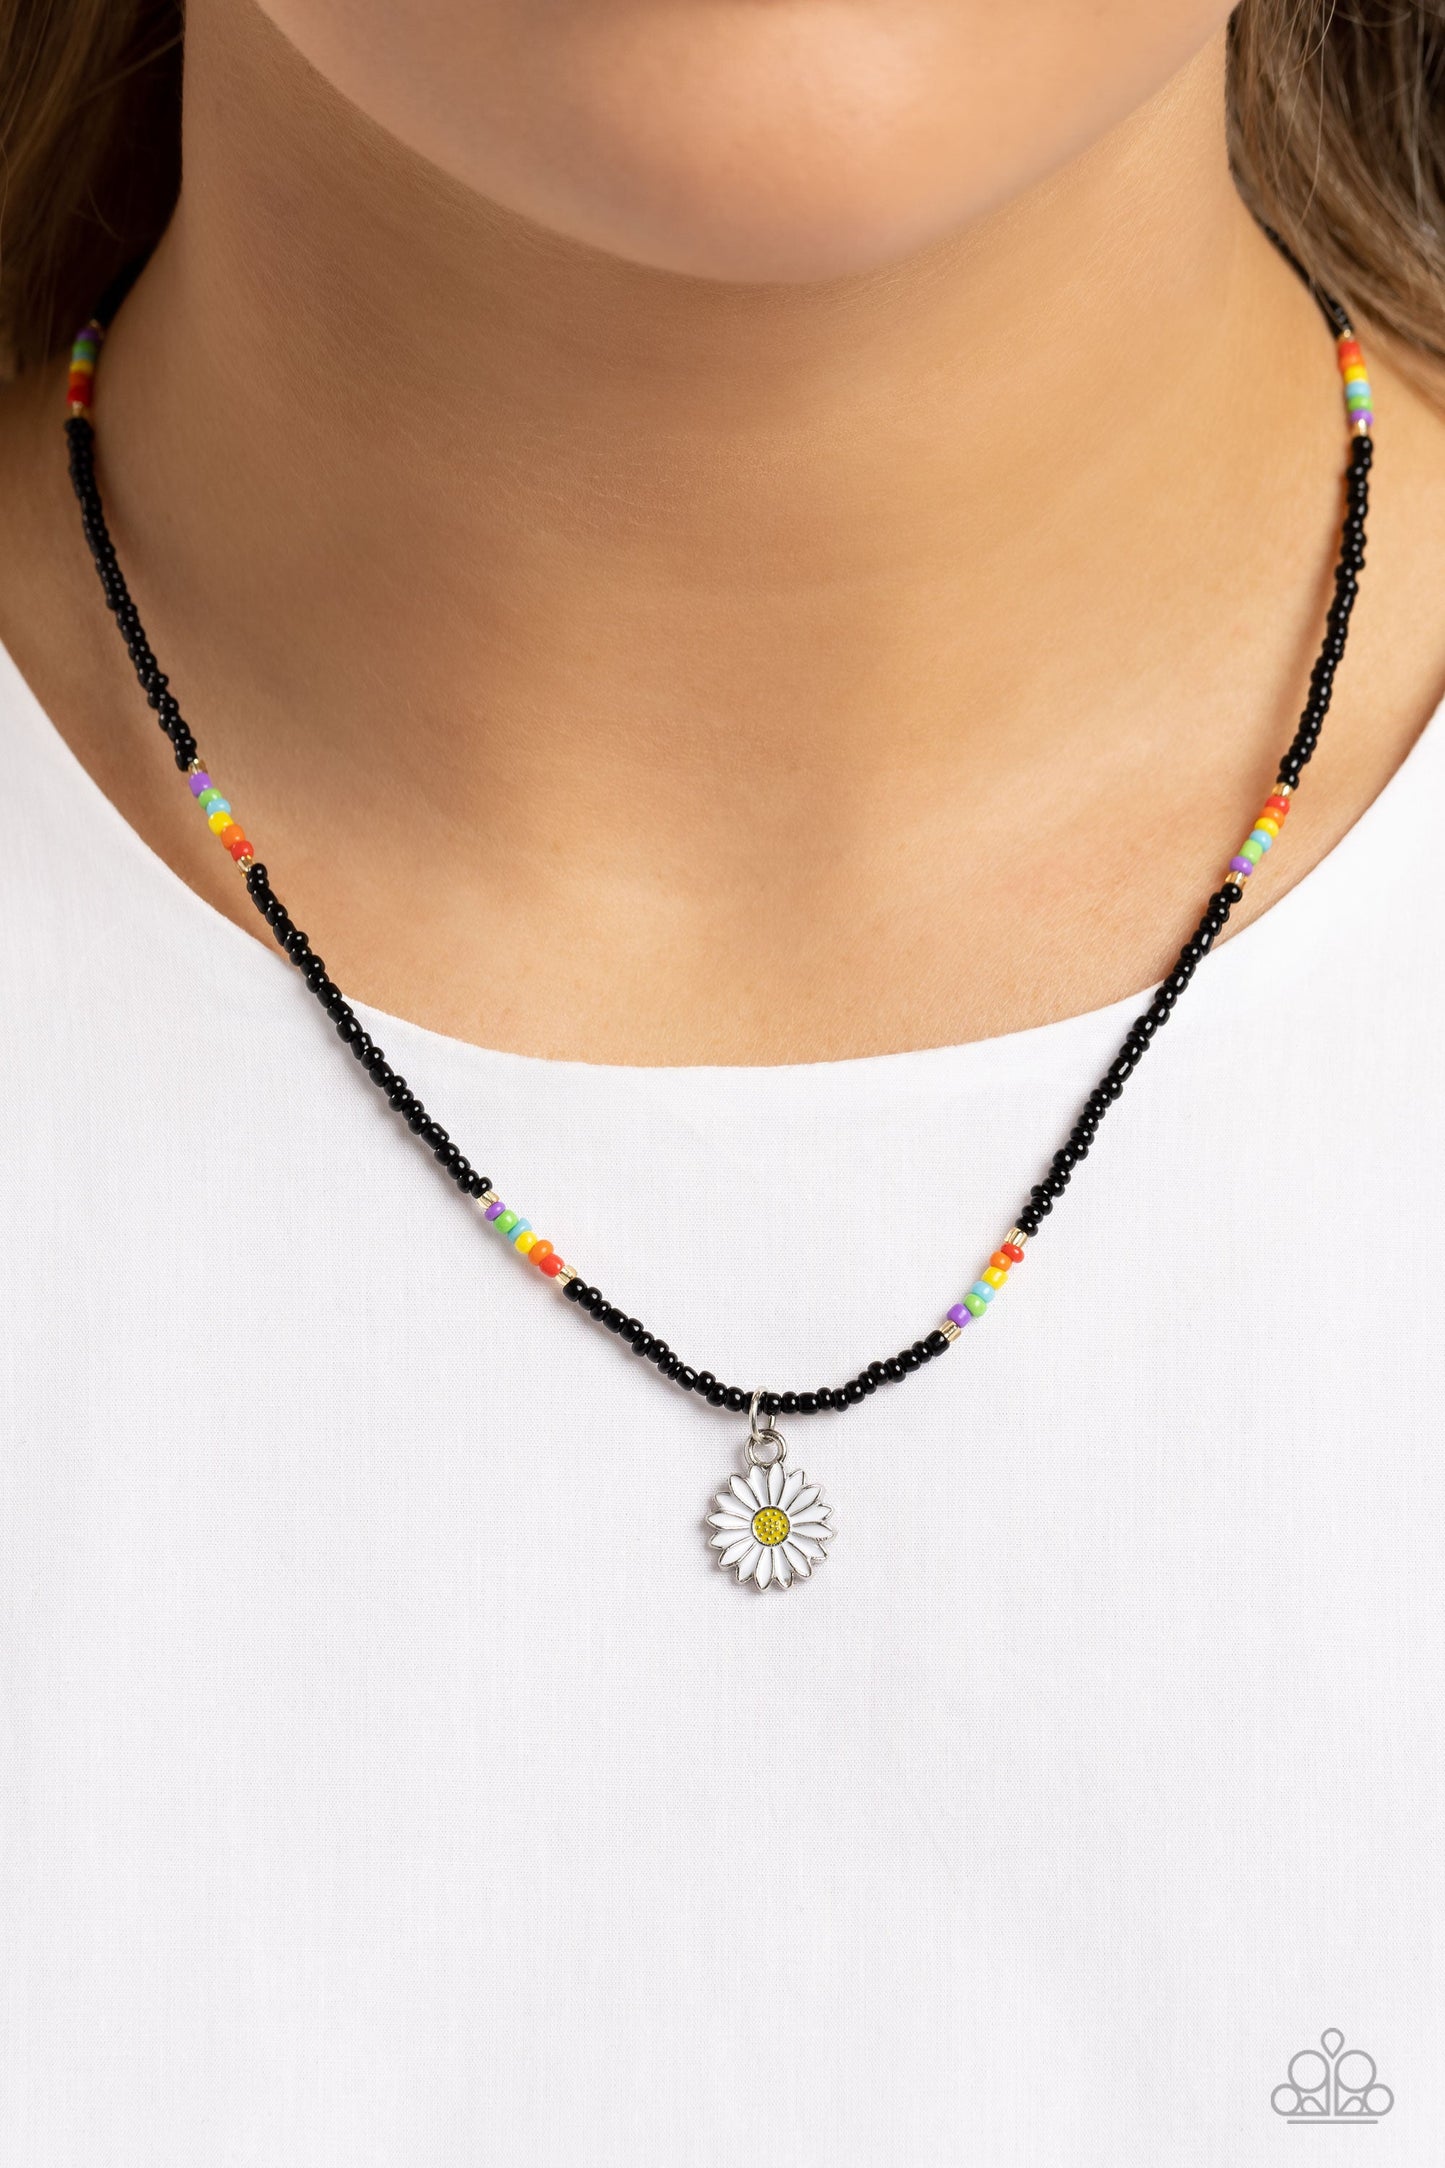 Charming Chance - Black/Multicolored Seed Beads/White Daisy Charm Necklace & matching earrings